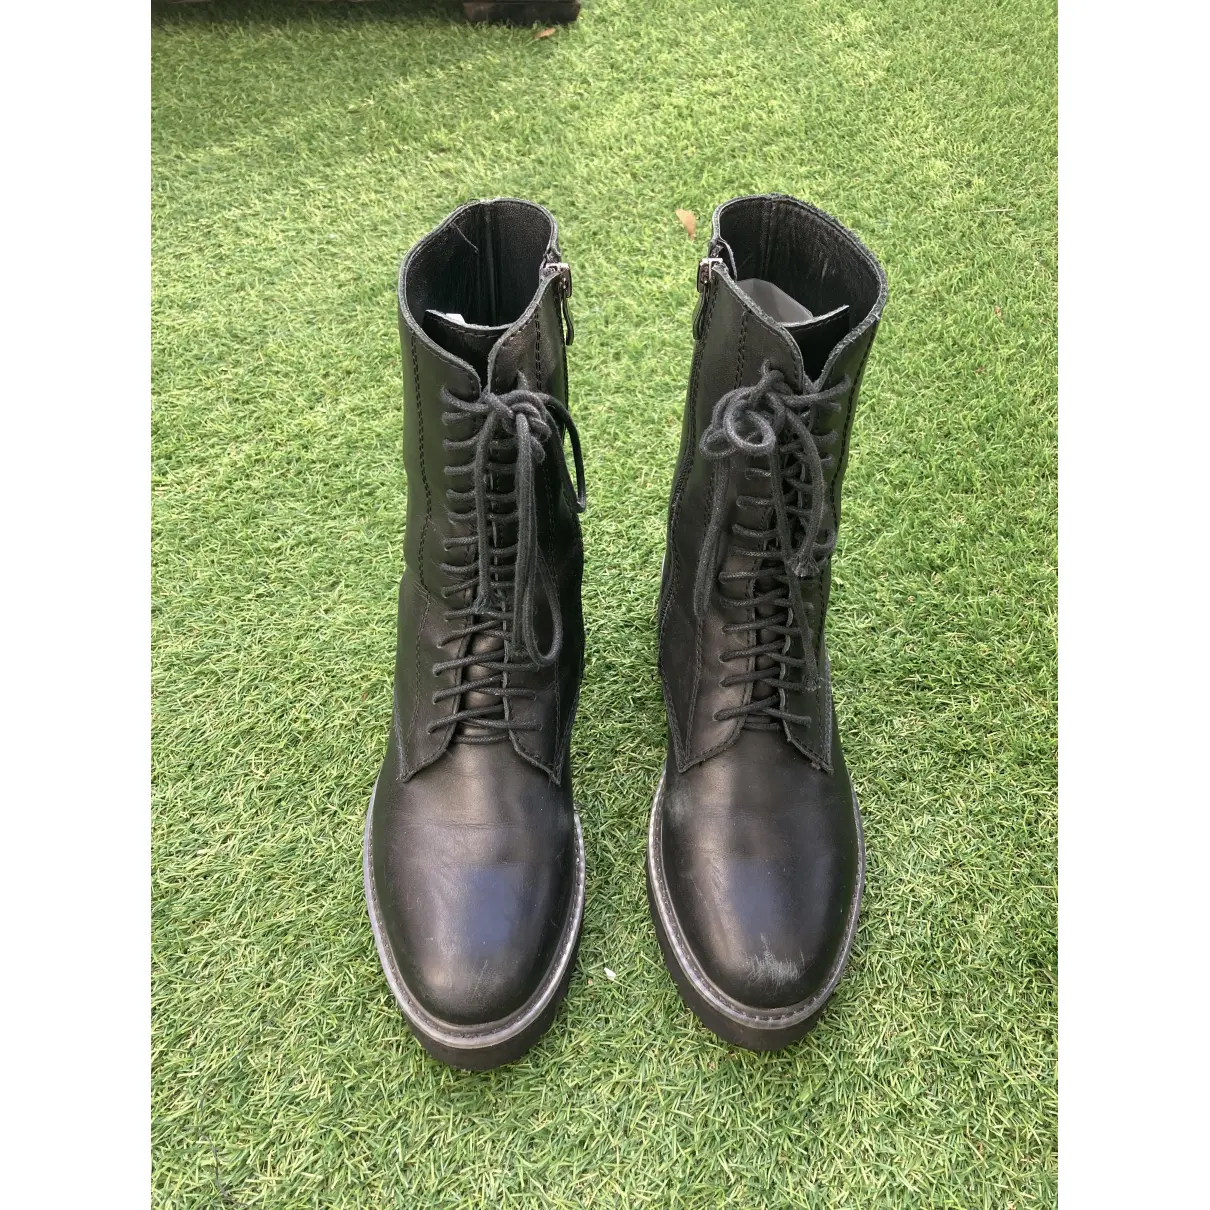 Buy Ann Demeulemeester Leather lace up boots online